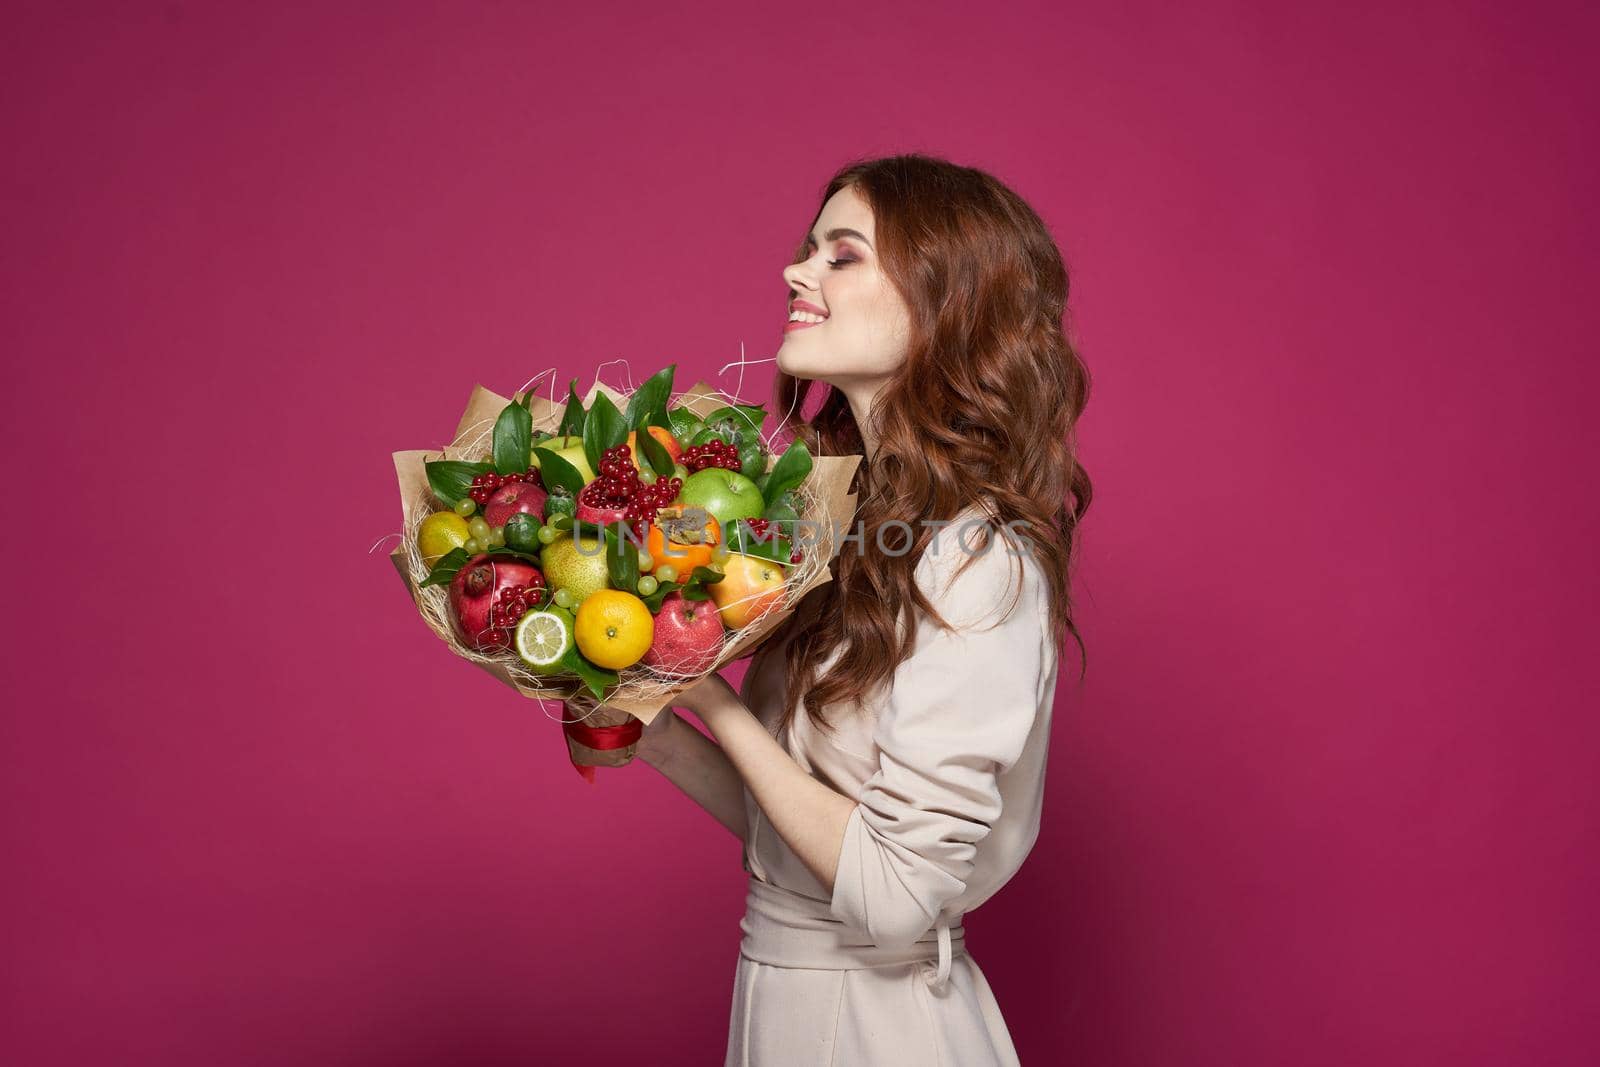 pretty woman smile posing fresh fruits bouquet emotions isolated background. High quality photo